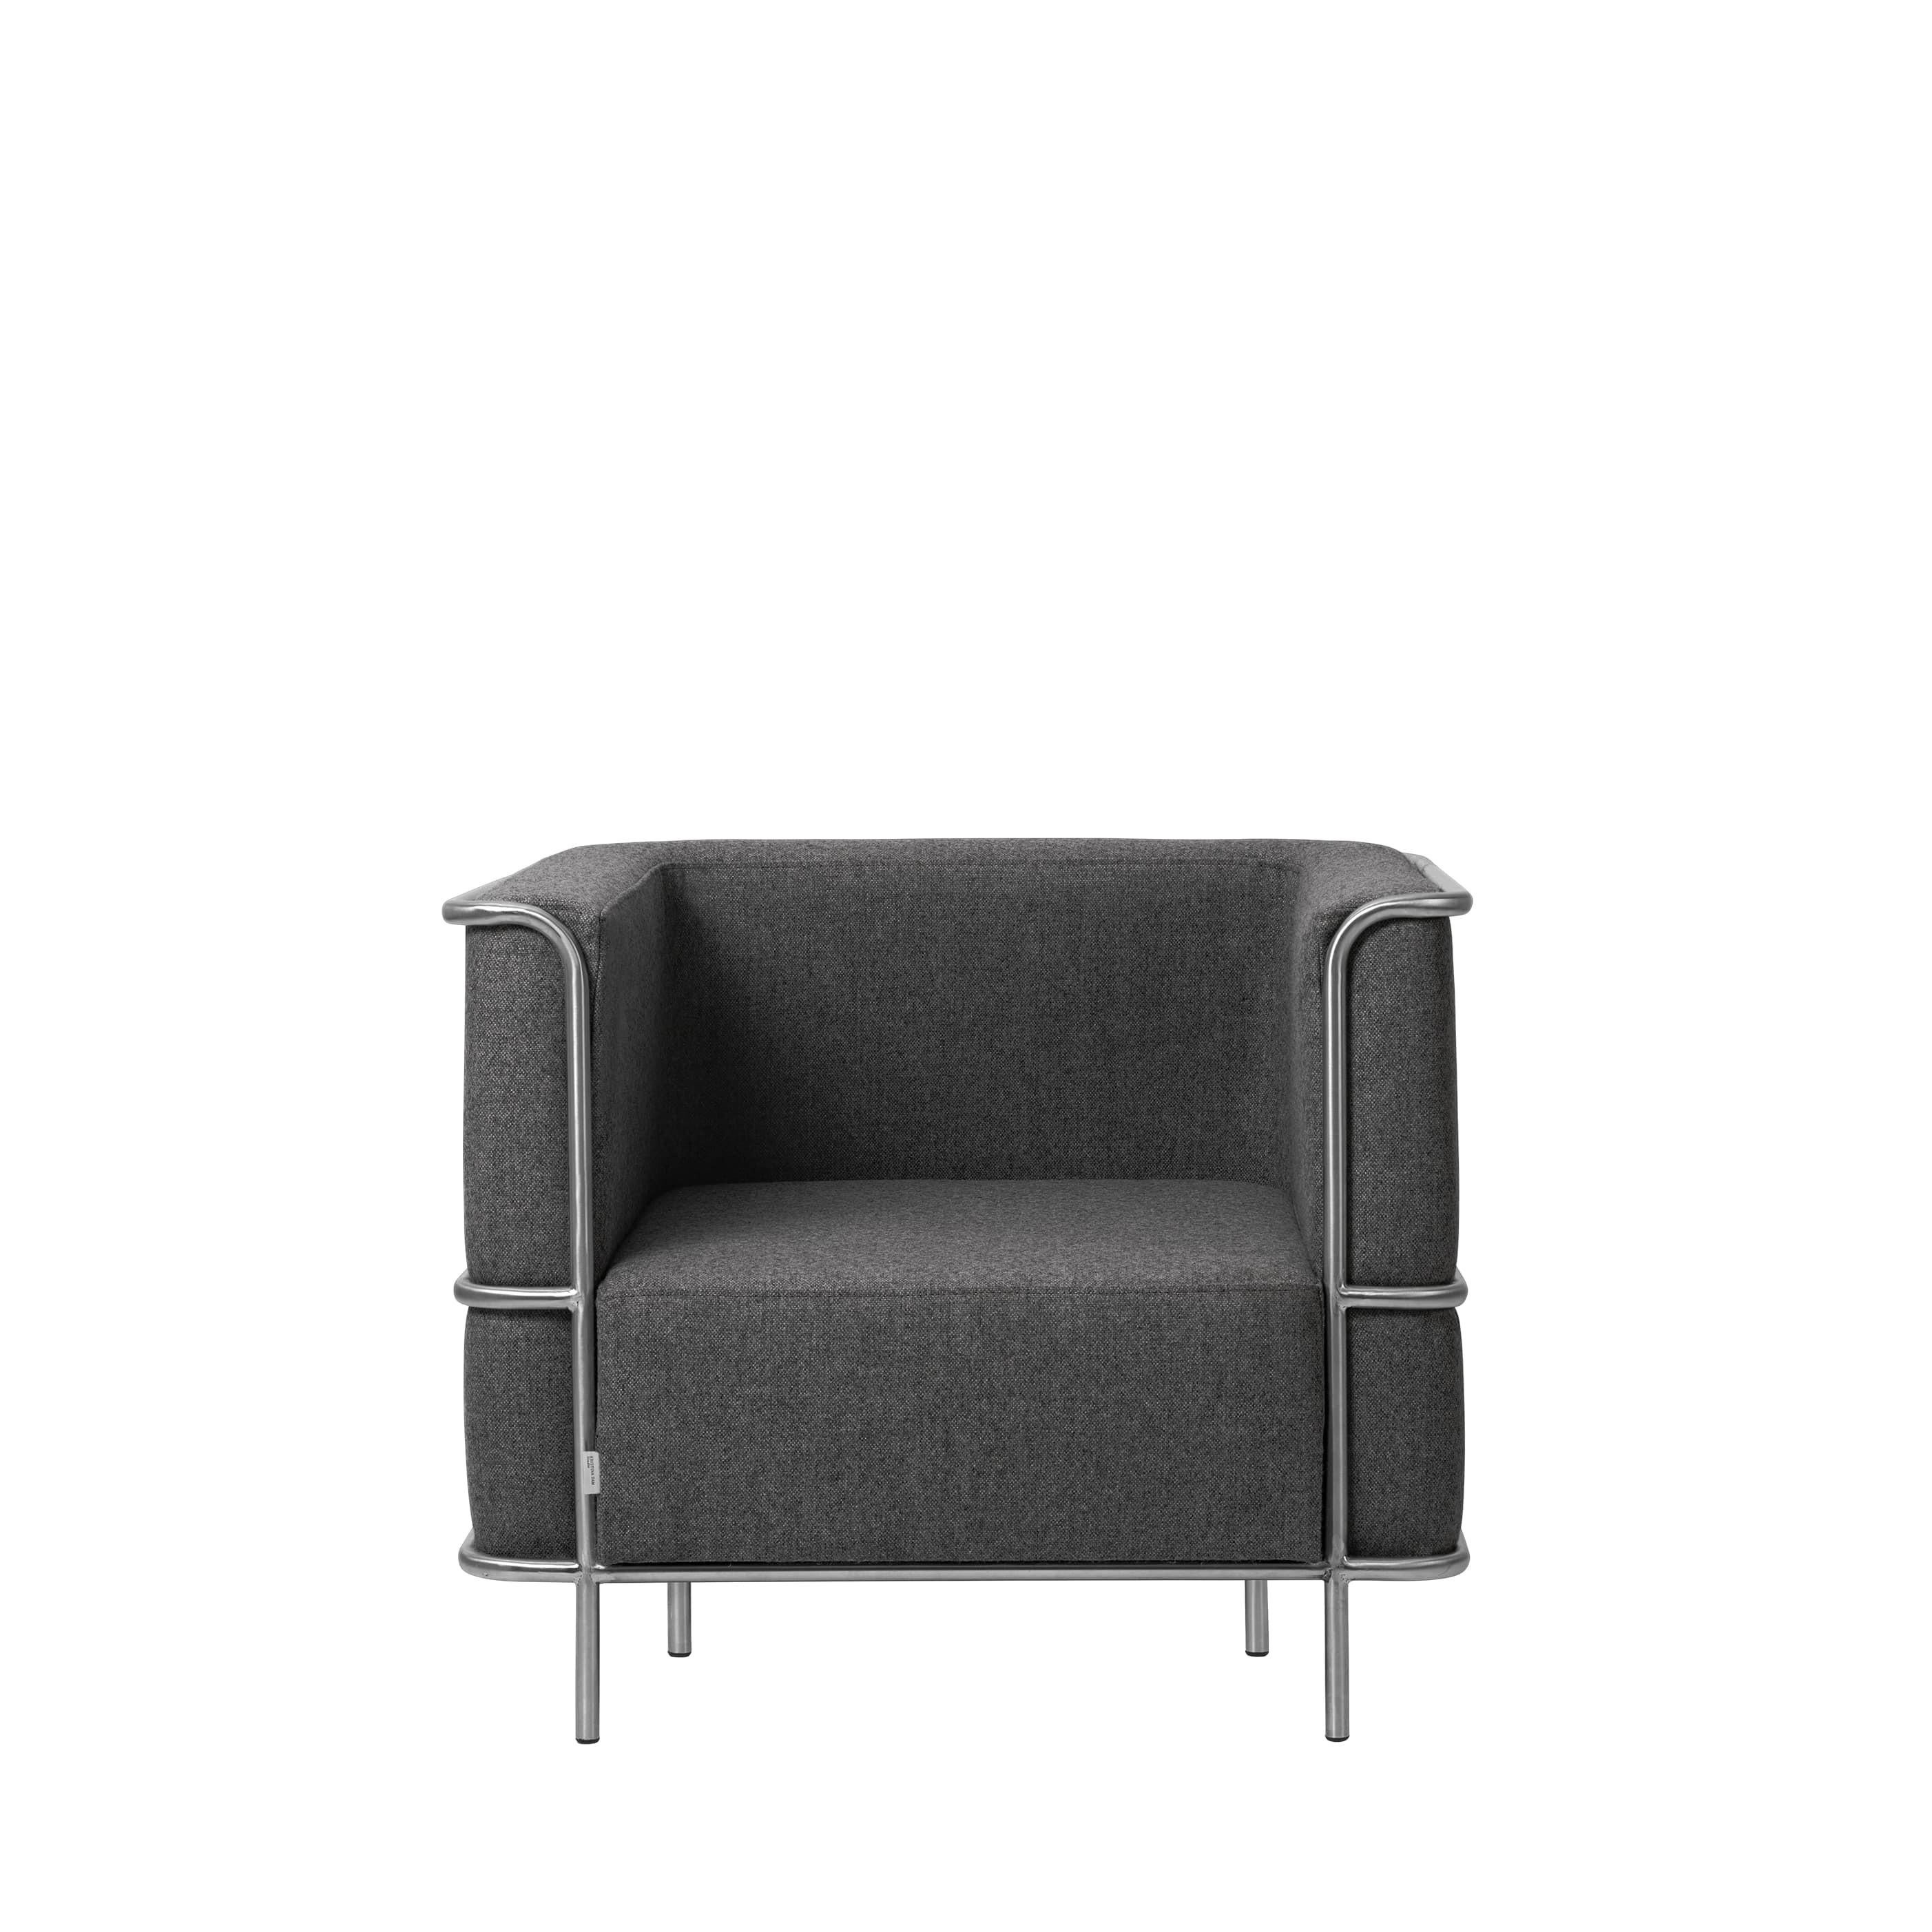 Grey modernist lounge chair by Kristina Dam Studio.
Materials: Dark grey wool
Dimensions: 87 x 77 x 70 cm


Kristina Dam graduated from The Royal Danish School of Fine Arts, Architecture and Design in Copenhagen. In her designs you will find